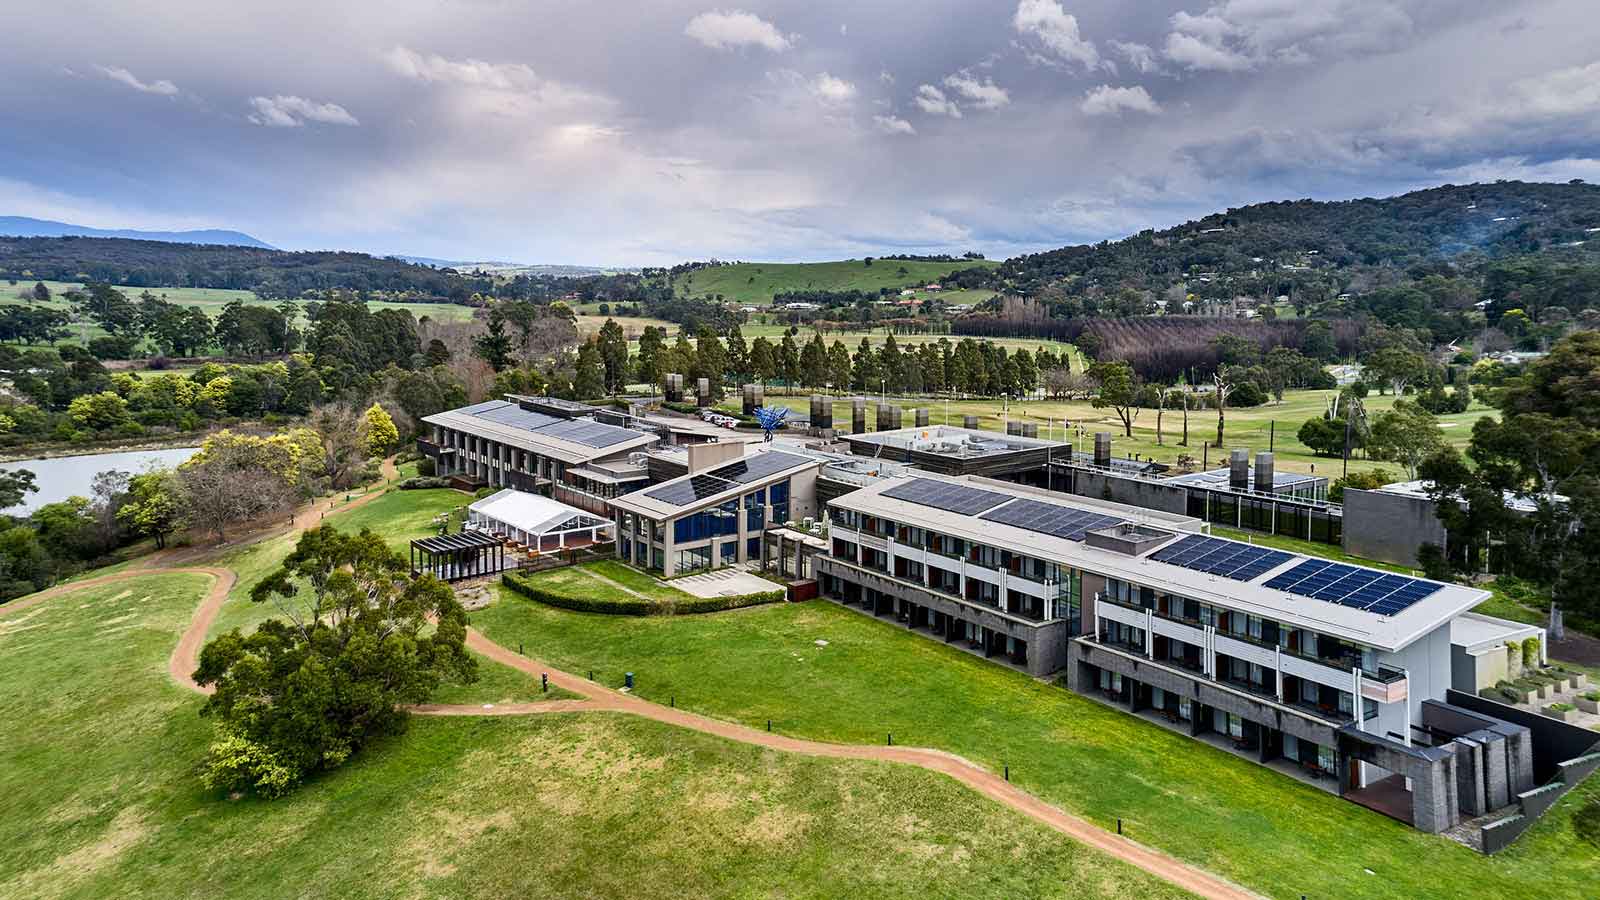 Aerial view of RACV Healesville solar panels and surrounding lush, green grounds.